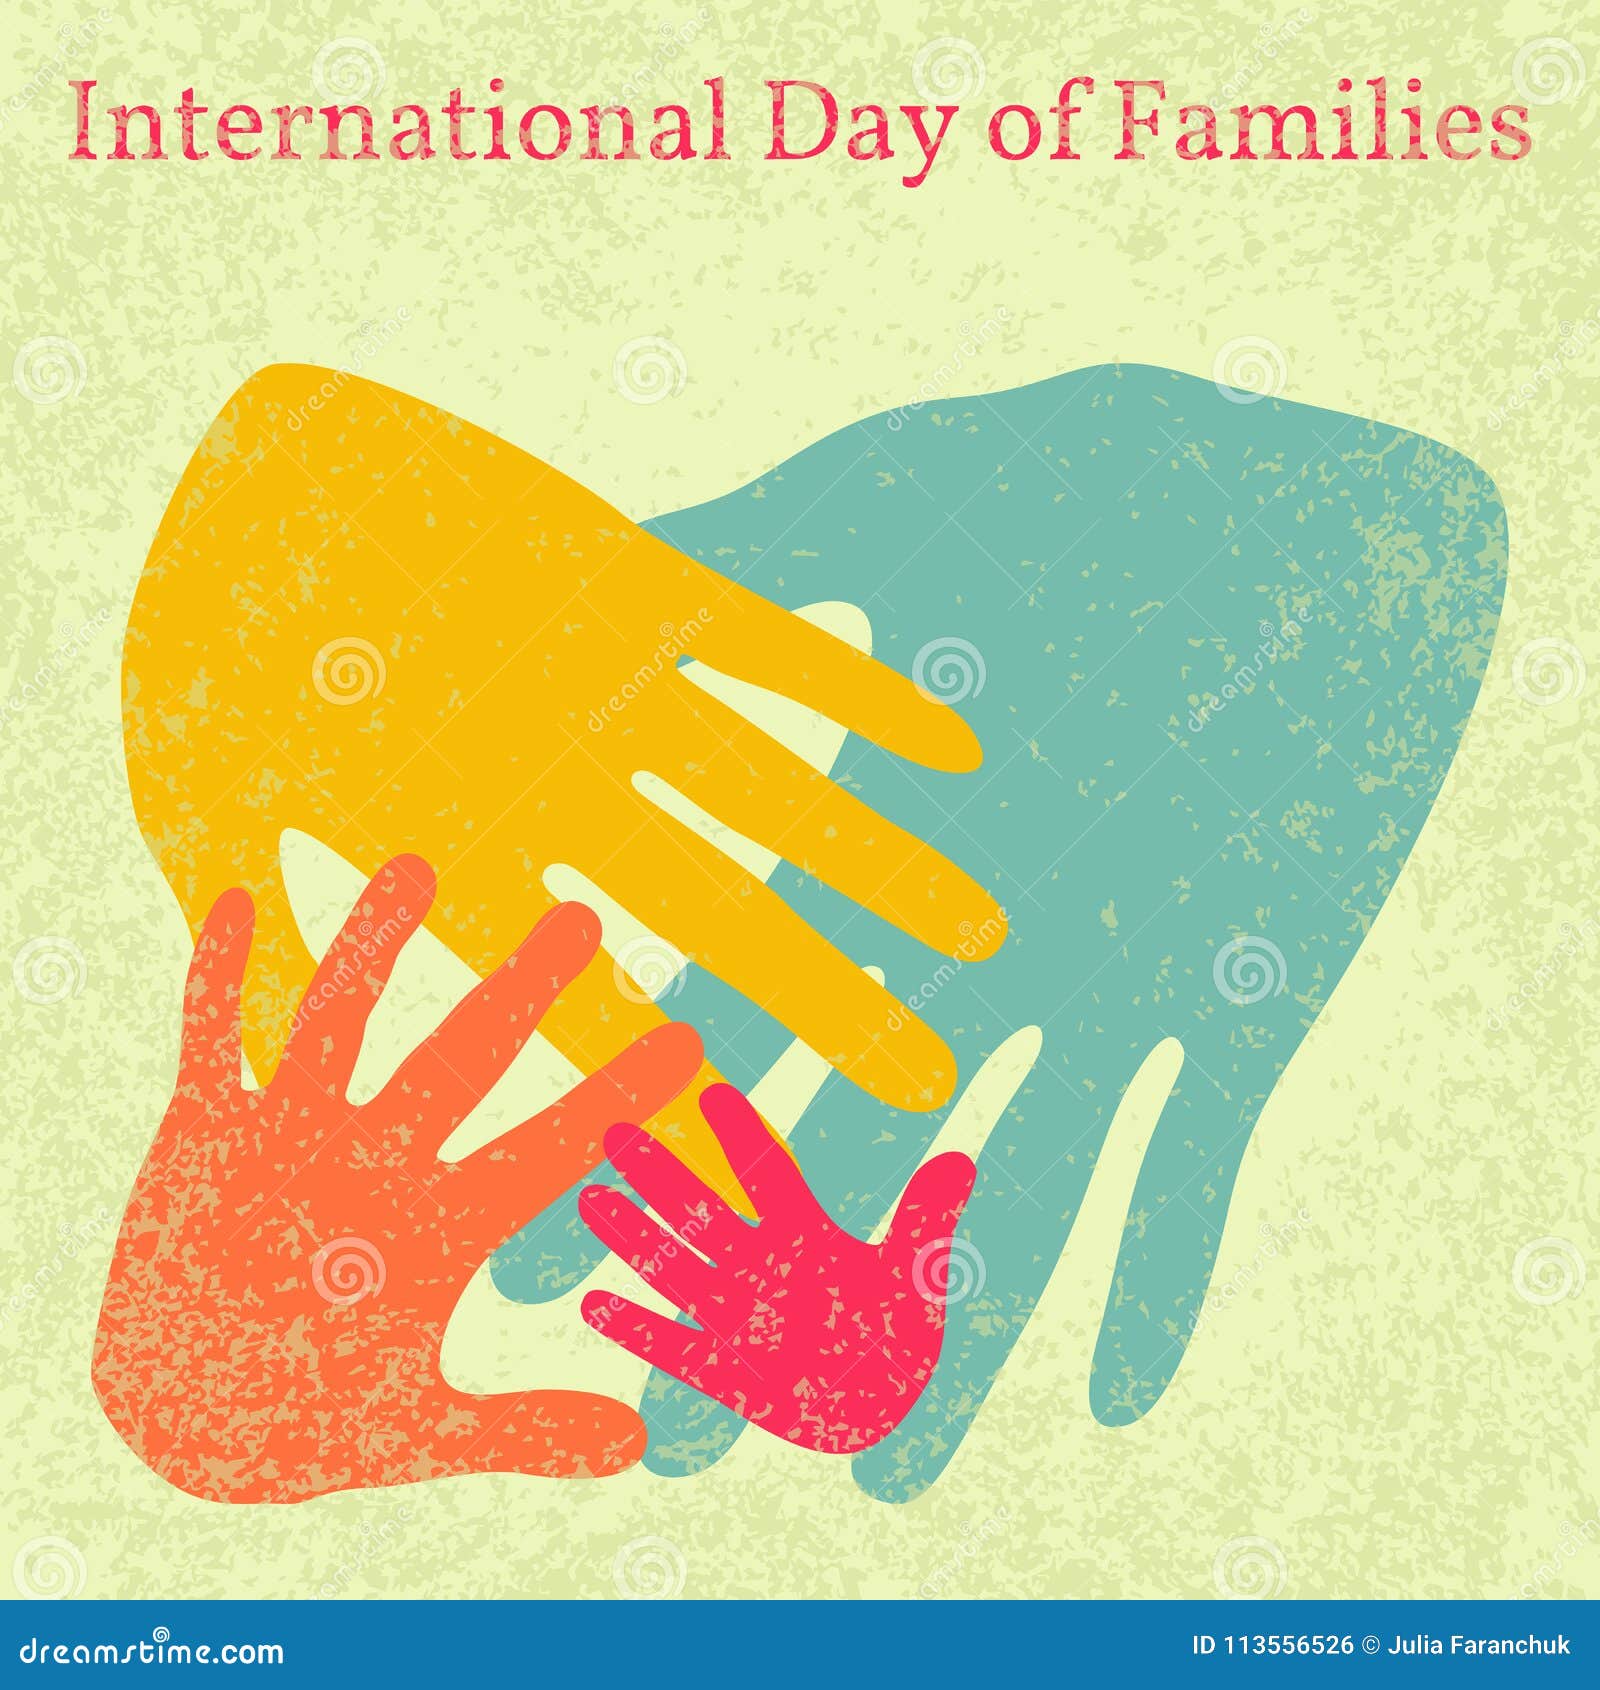 Drawing Cartoon Family International Family Day Poster | PSD Free Download  - Pikbest